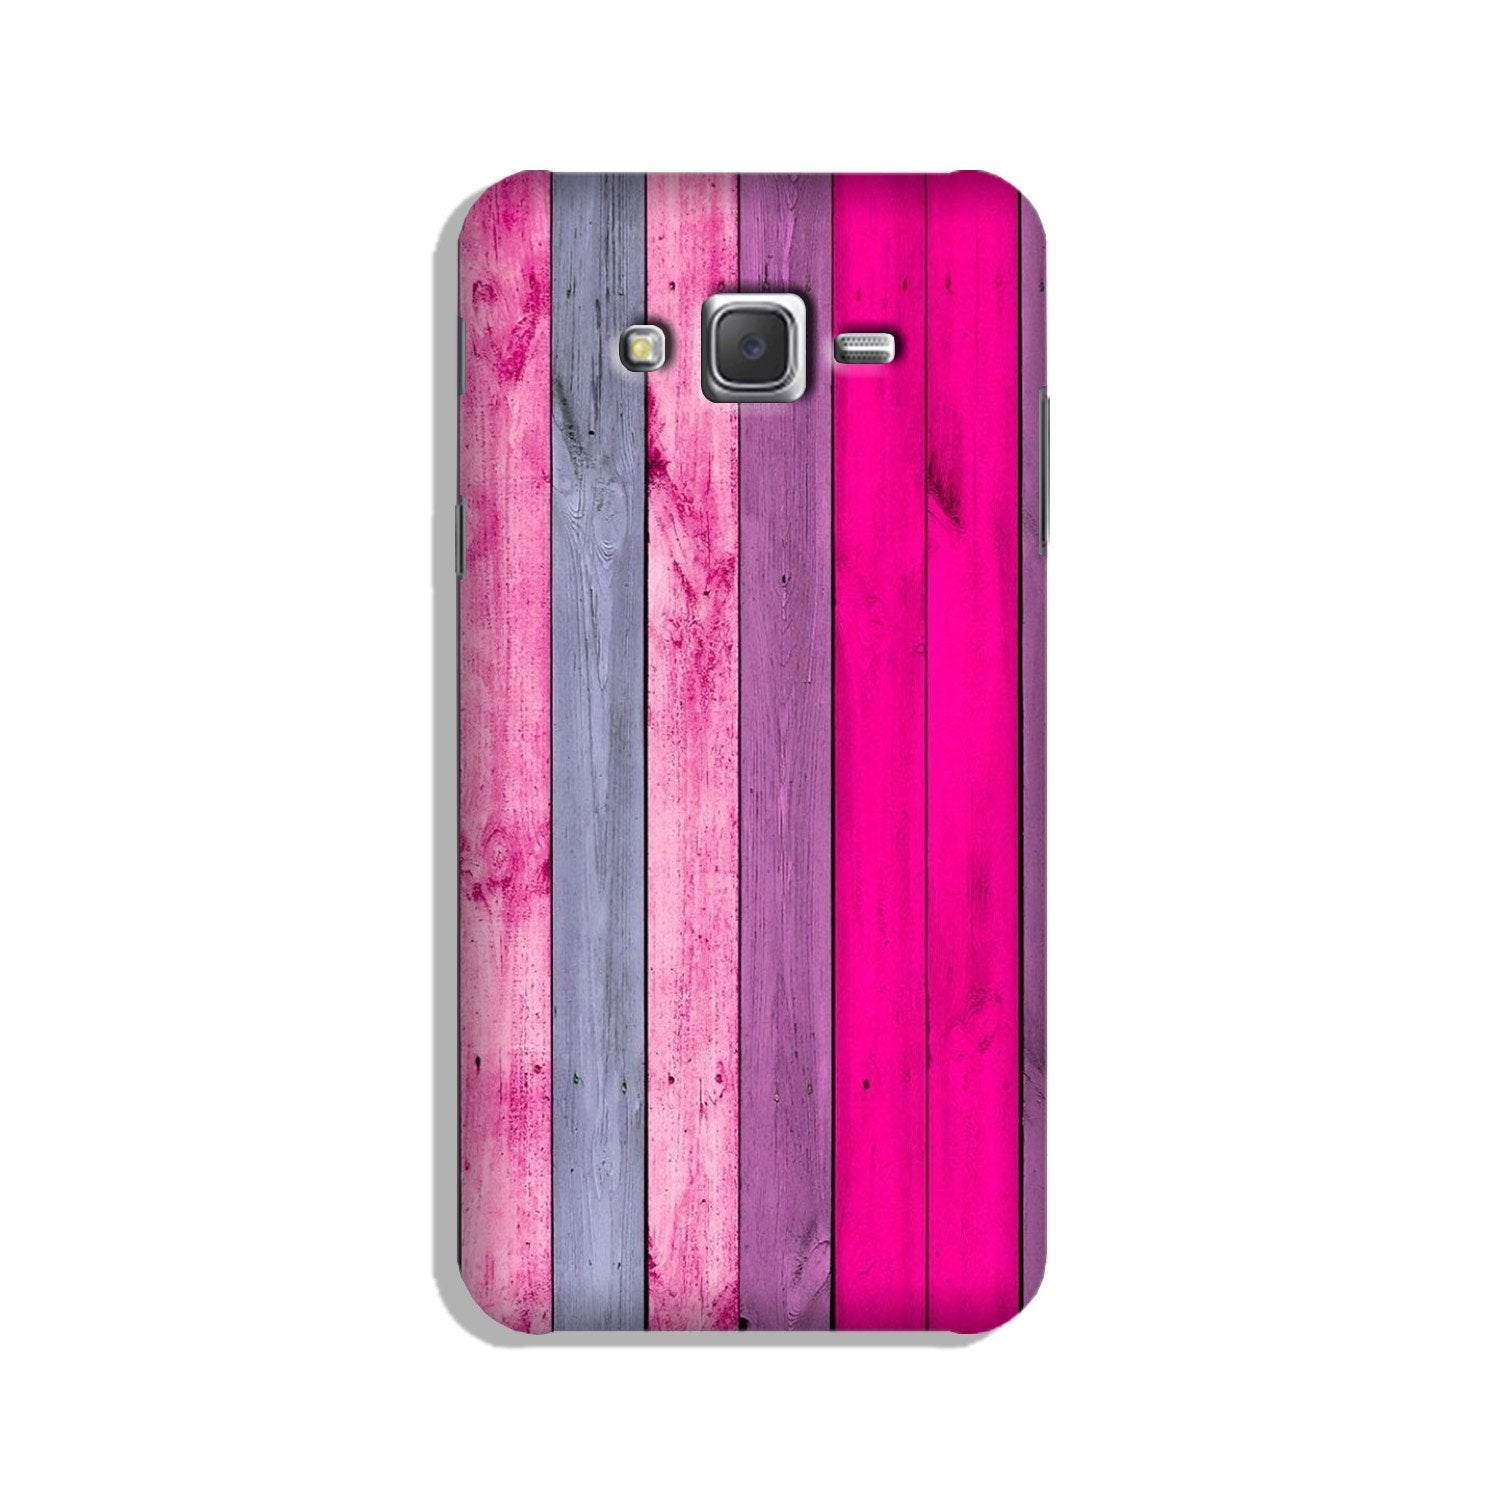 Wooden look Case for Galaxy J5 (2015)